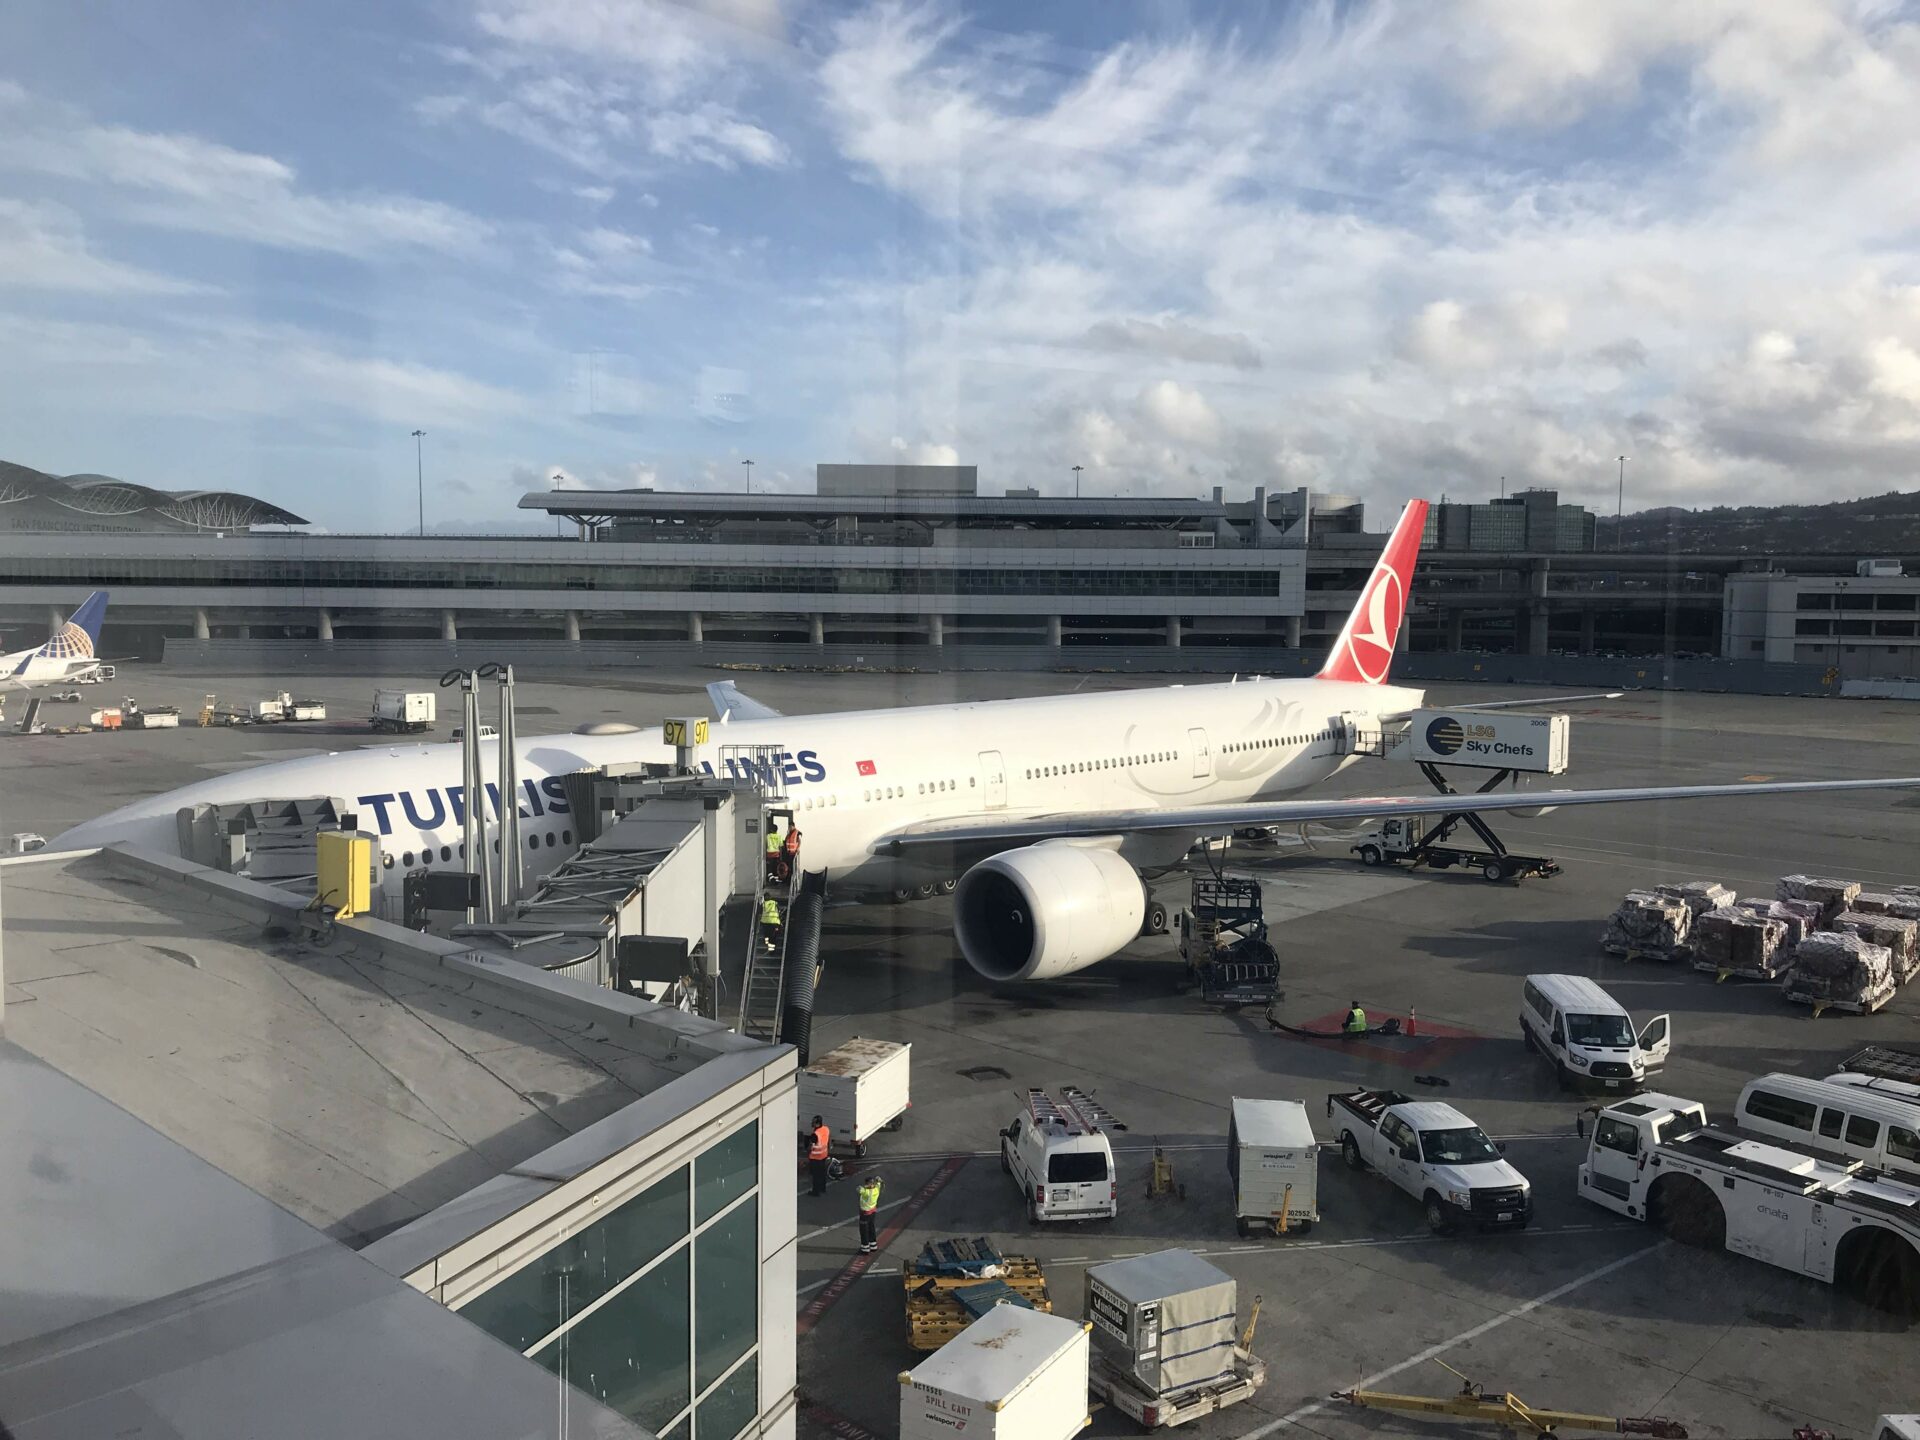 How to Get A Turkish Airlines Record Locator for an Avianca LifeMiles Award Ticket